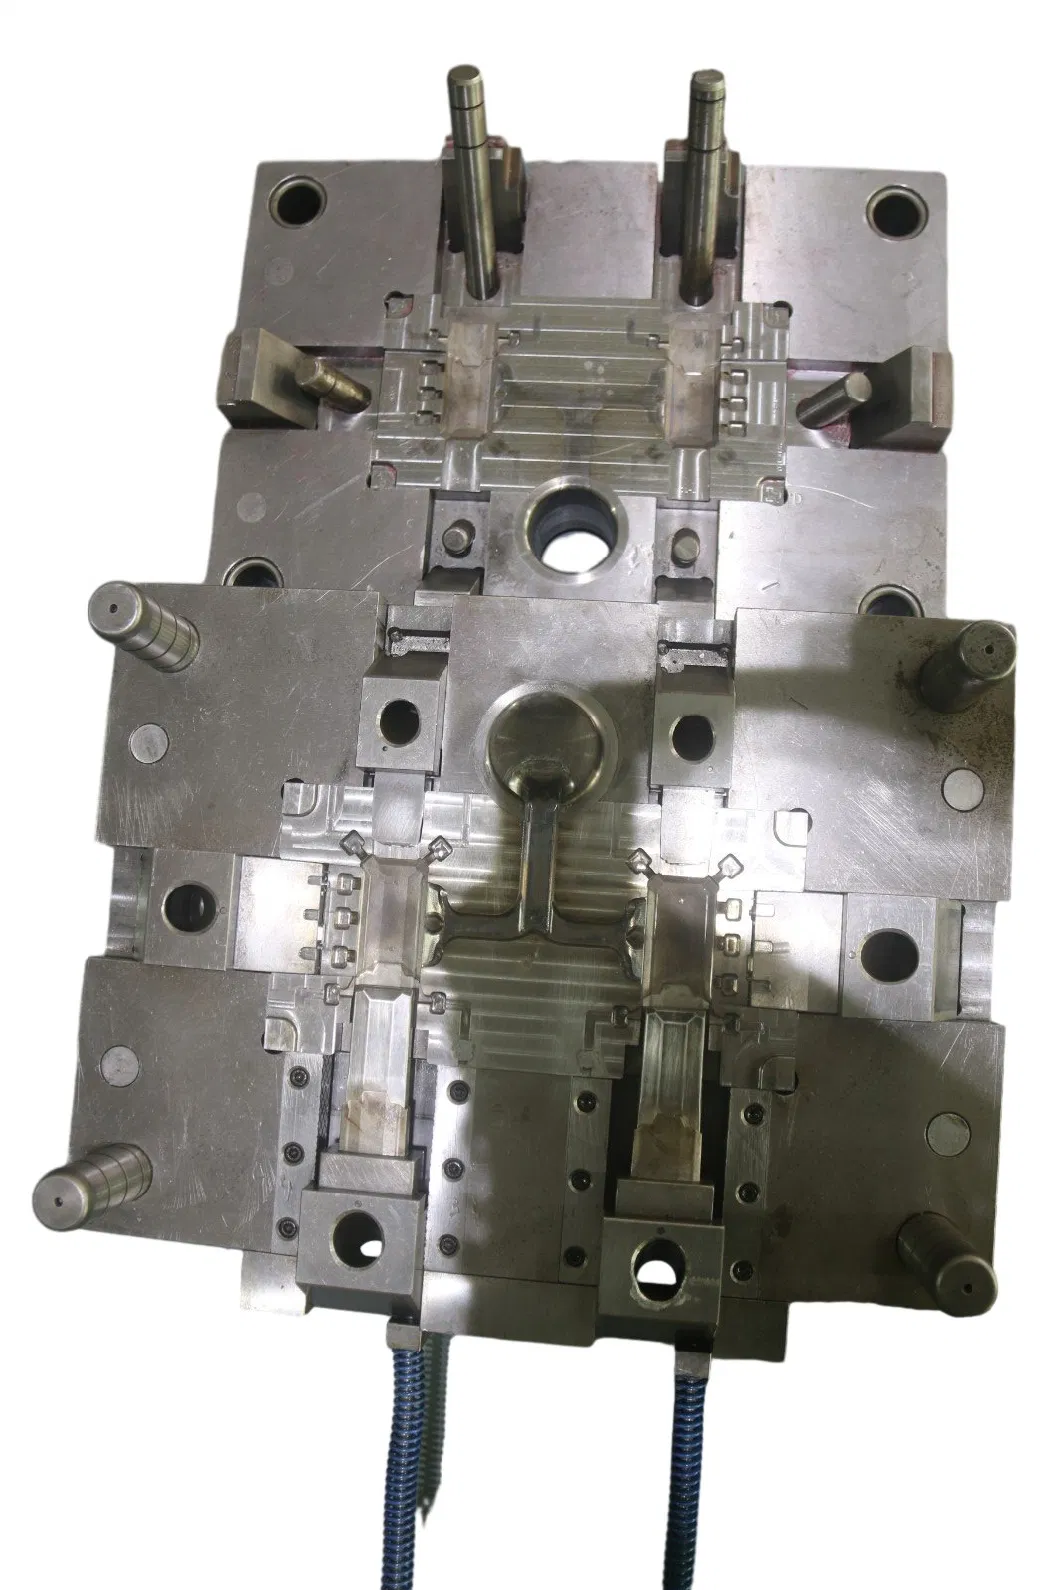 Advanced Plastic Injection Molding Technology Services